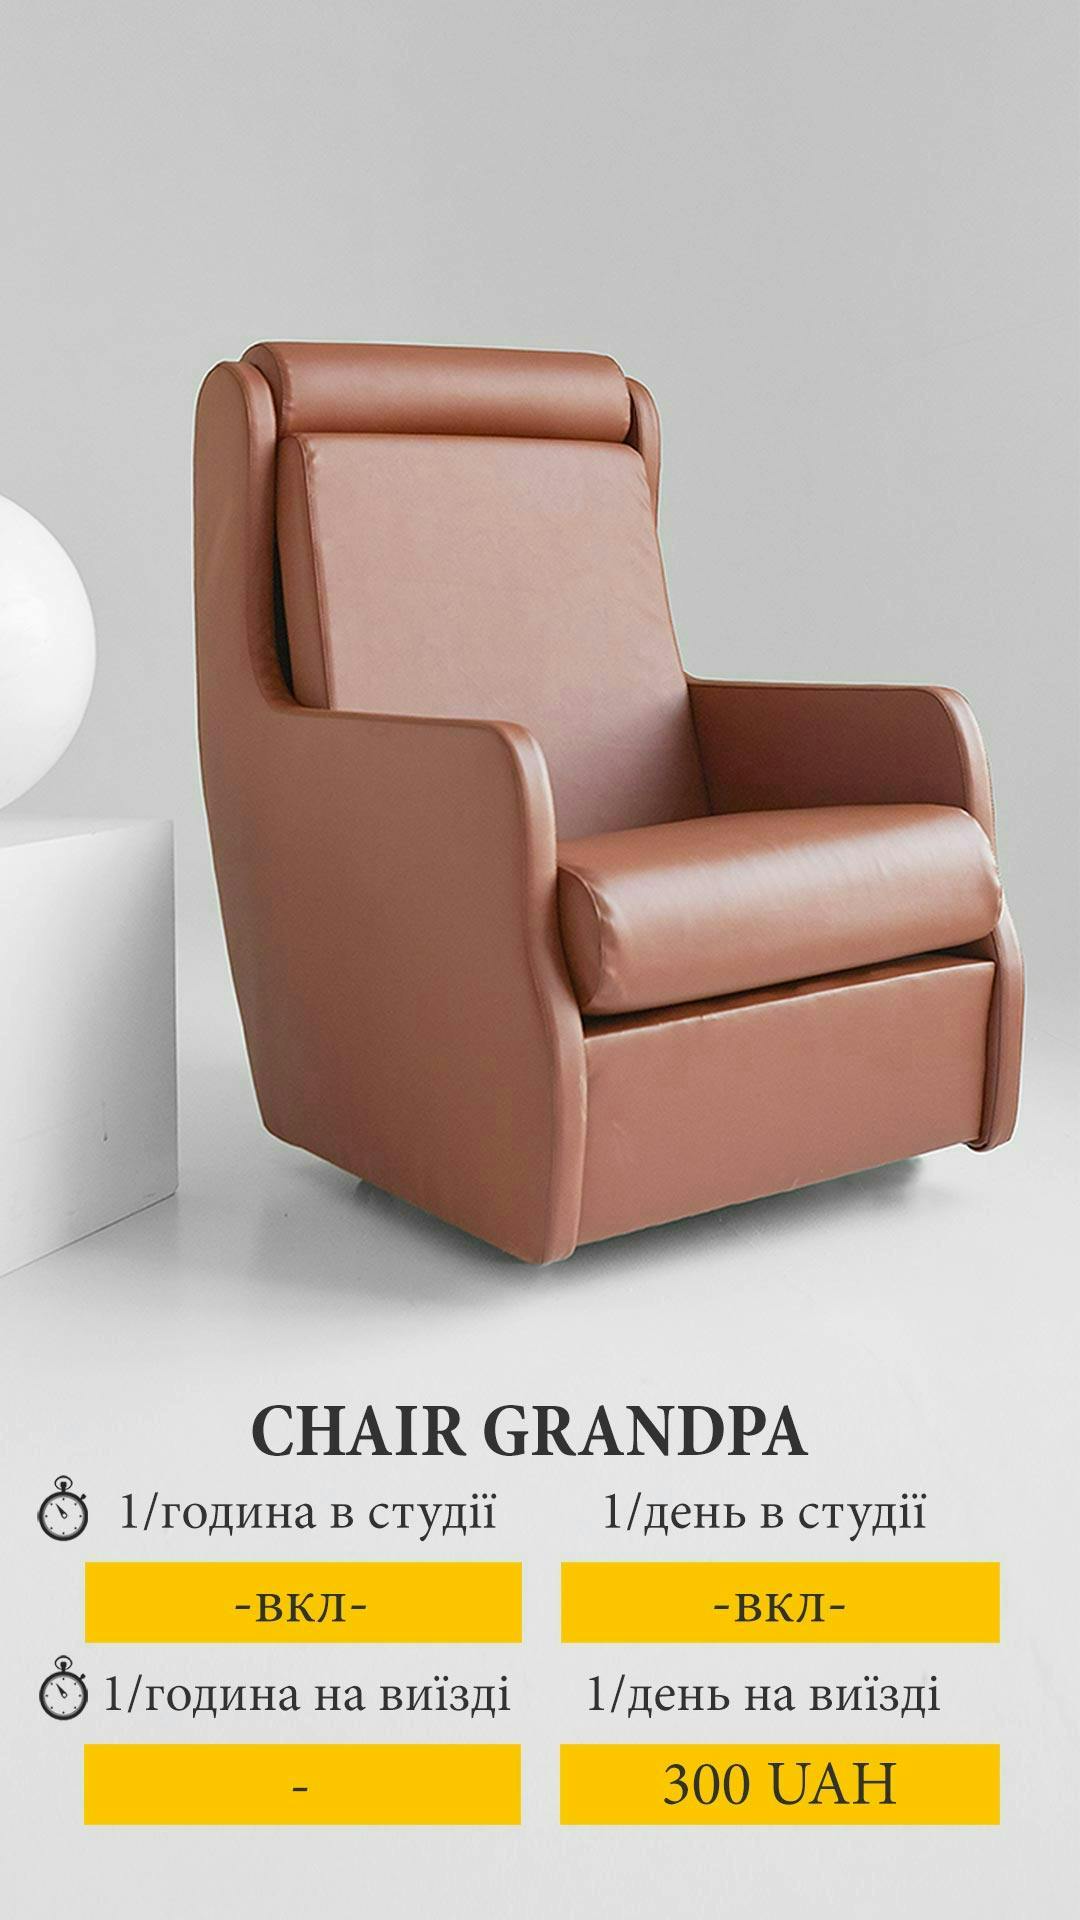 Cover image from chair_grandpa